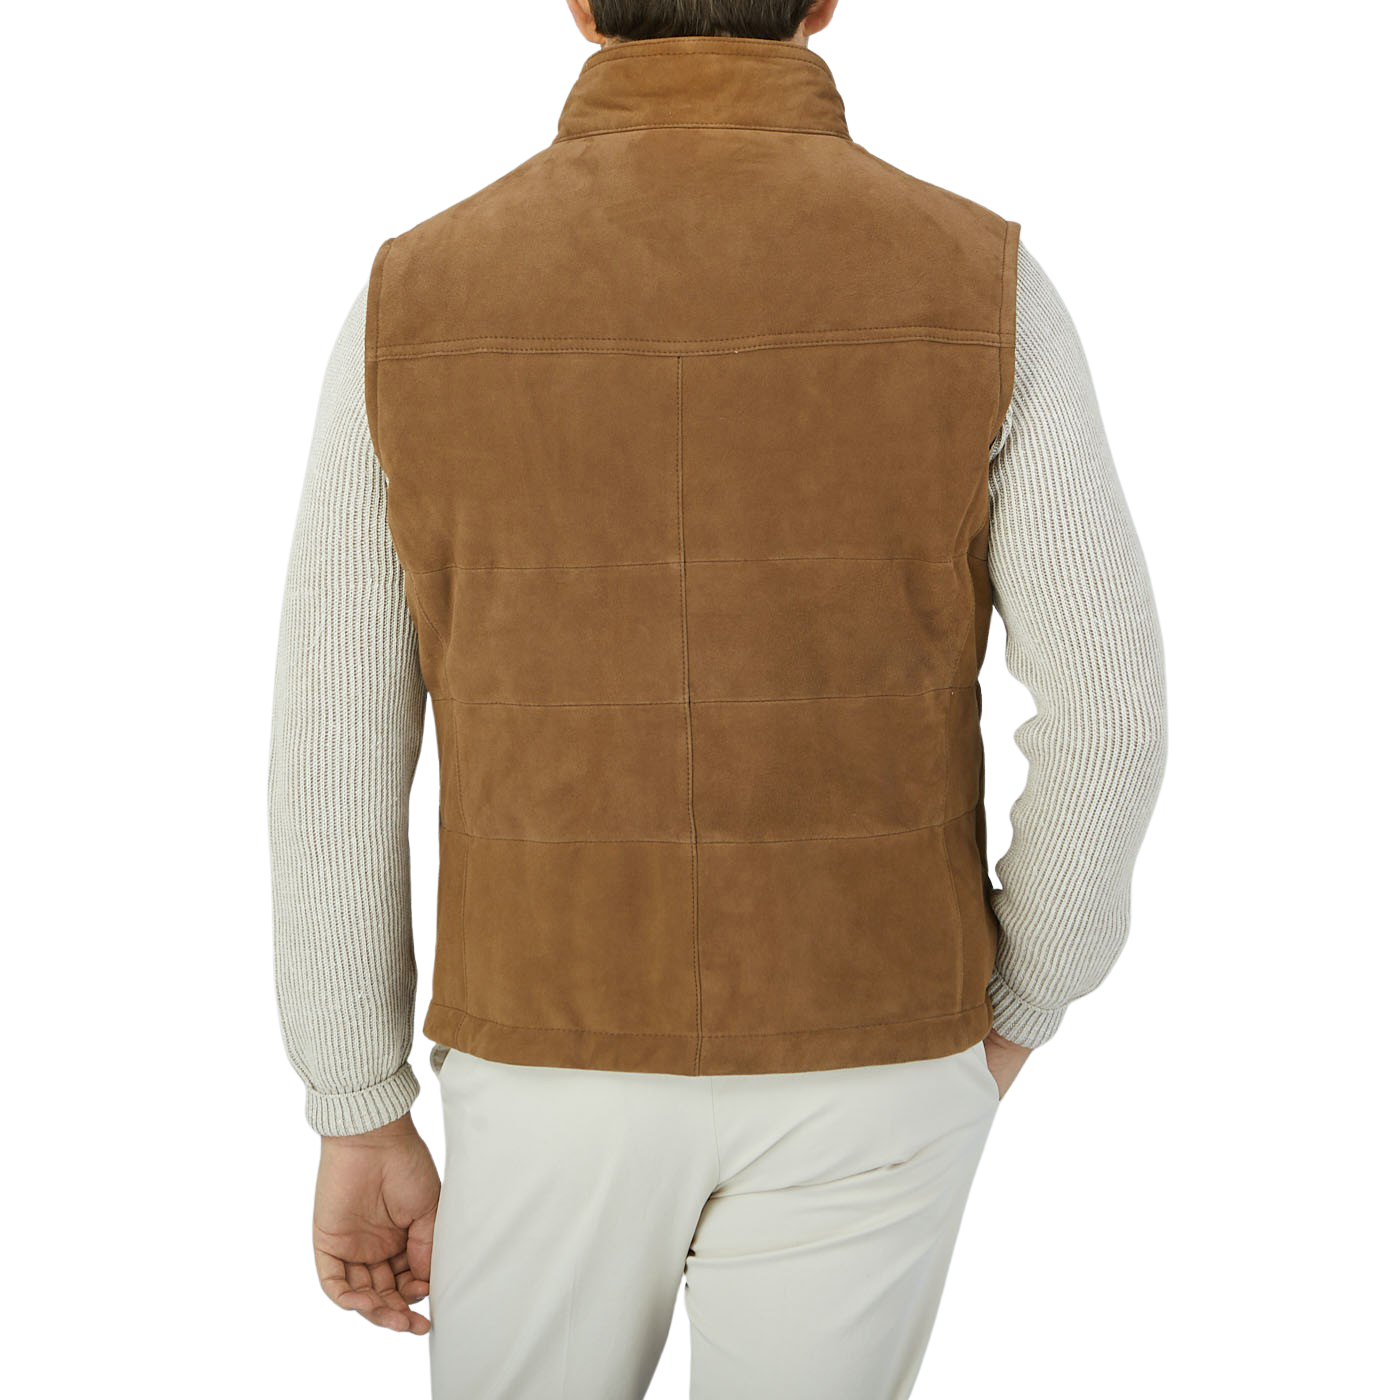 Werner Christ Tobacco Brown Suede Leather Alberto Gilet, wearing a suede leather vest with Primaloft technical padding.